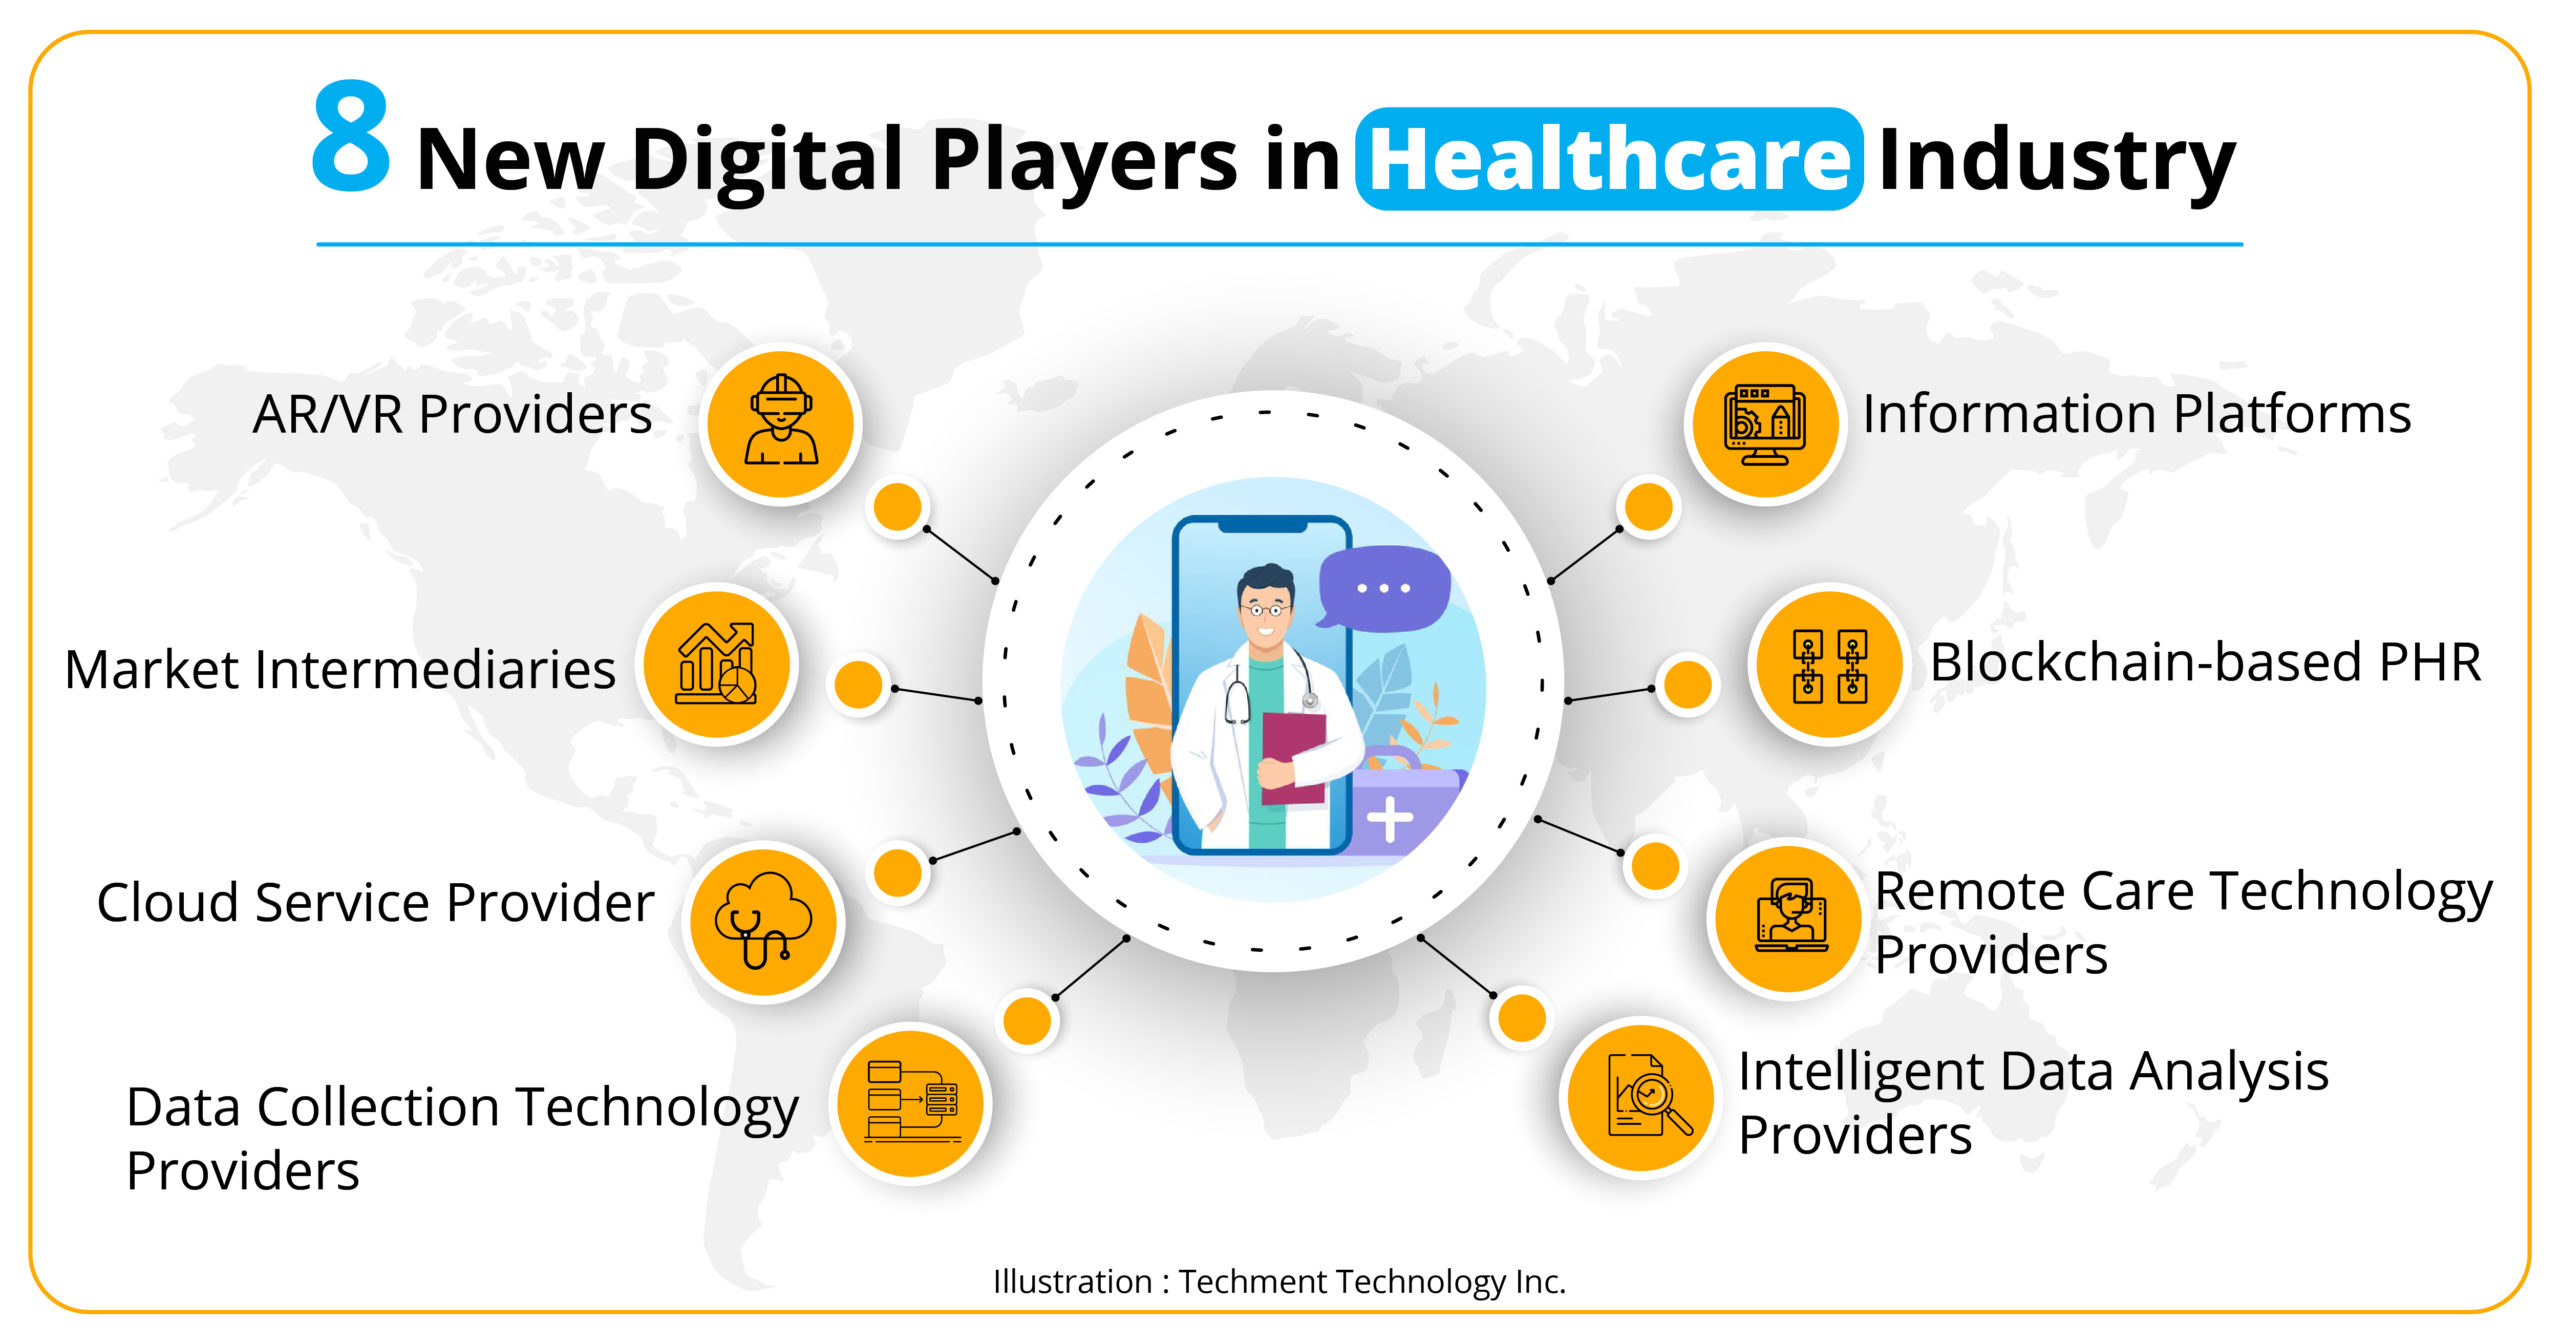 New digital players in healthcare industry